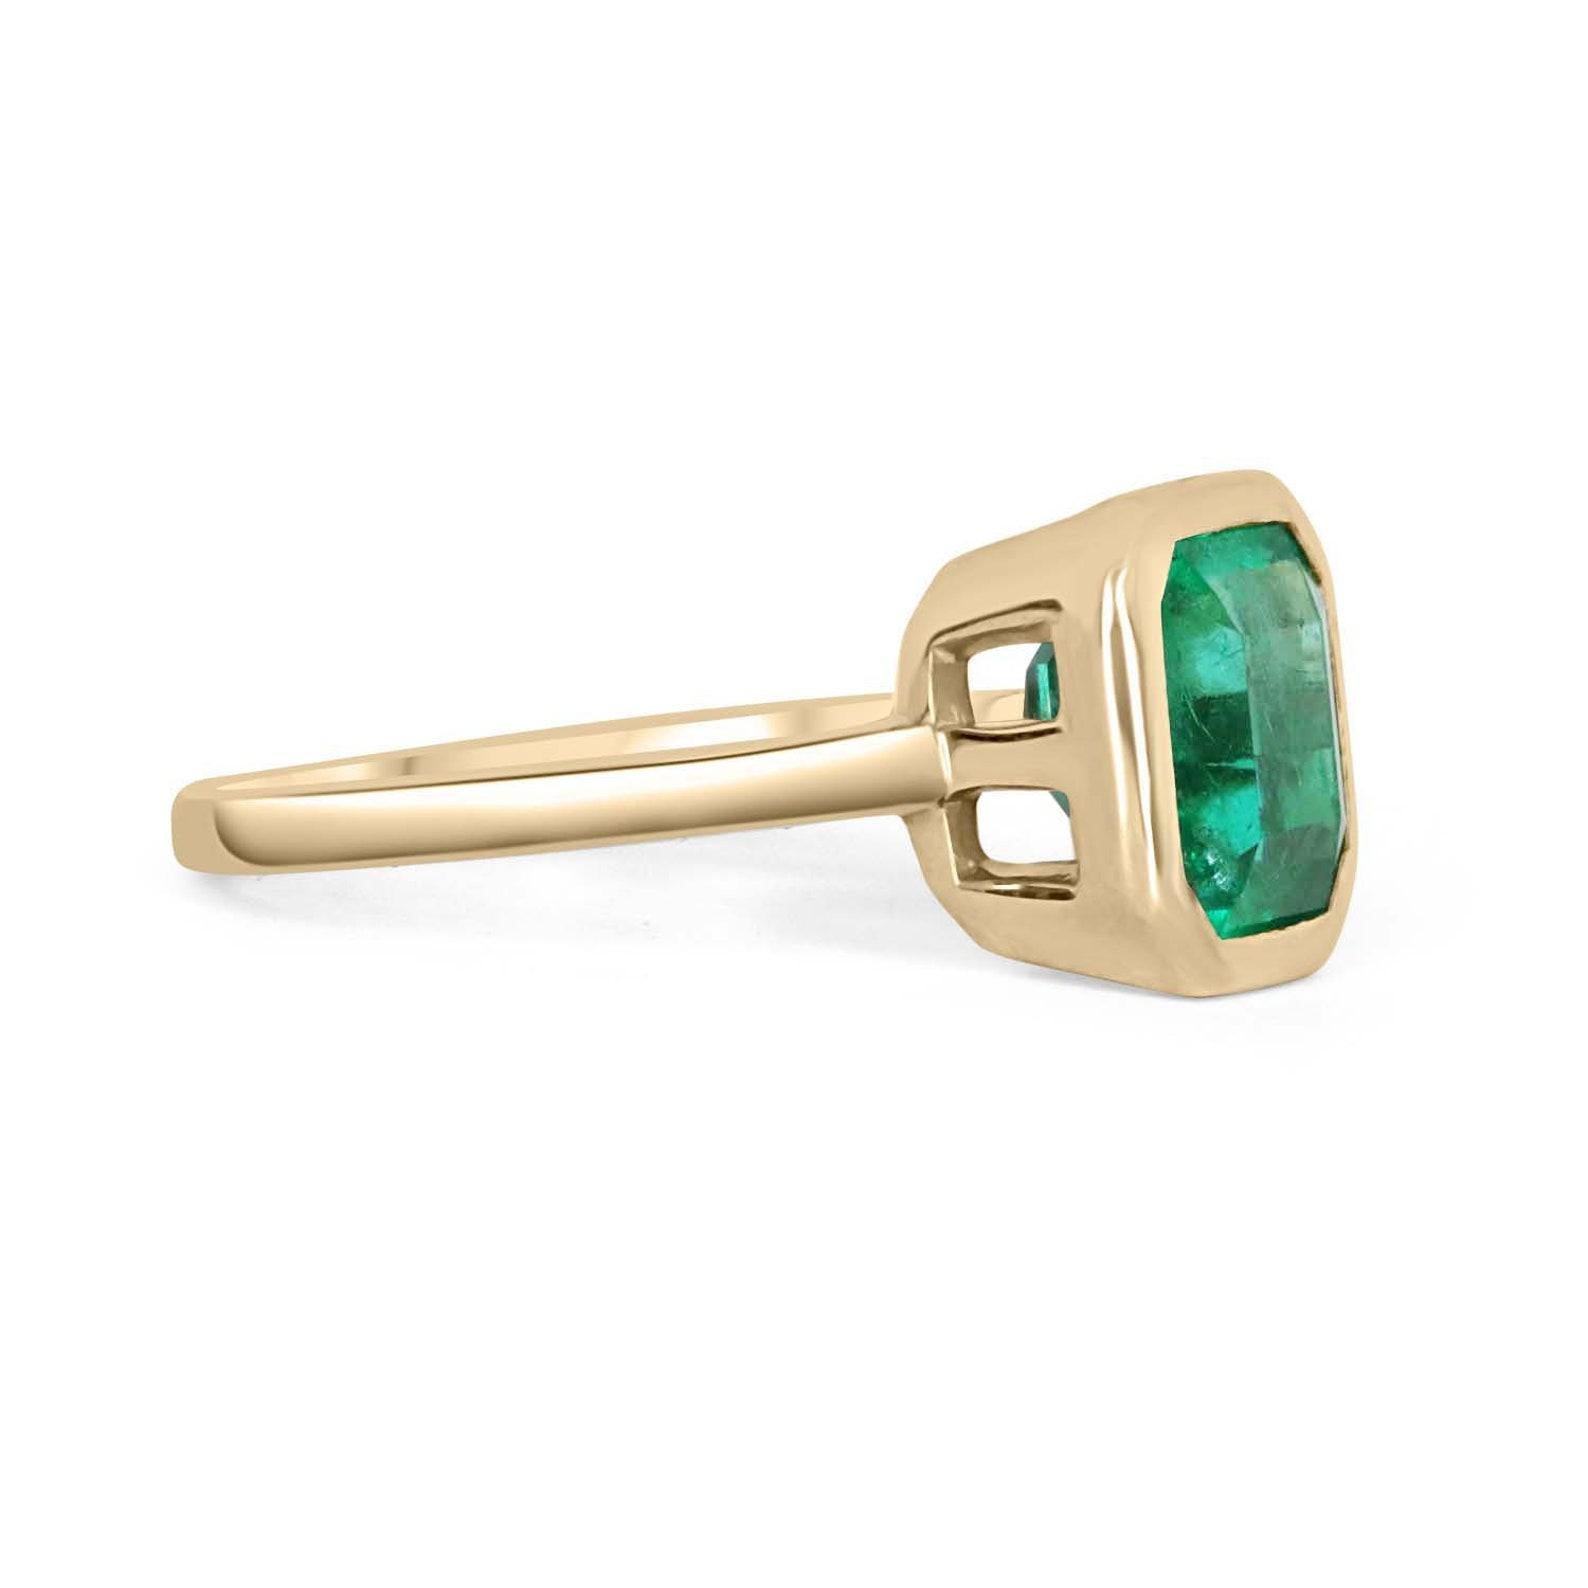 Displayed is a bluish-green Colombian emerald, solitaire, emerald-cut bezel ring in 18K yellow gold. This gorgeous solitaire ring carries a full 2.65-carat emerald in a sleek bezel setting. The emerald has incredible clarity and luster. This emerald